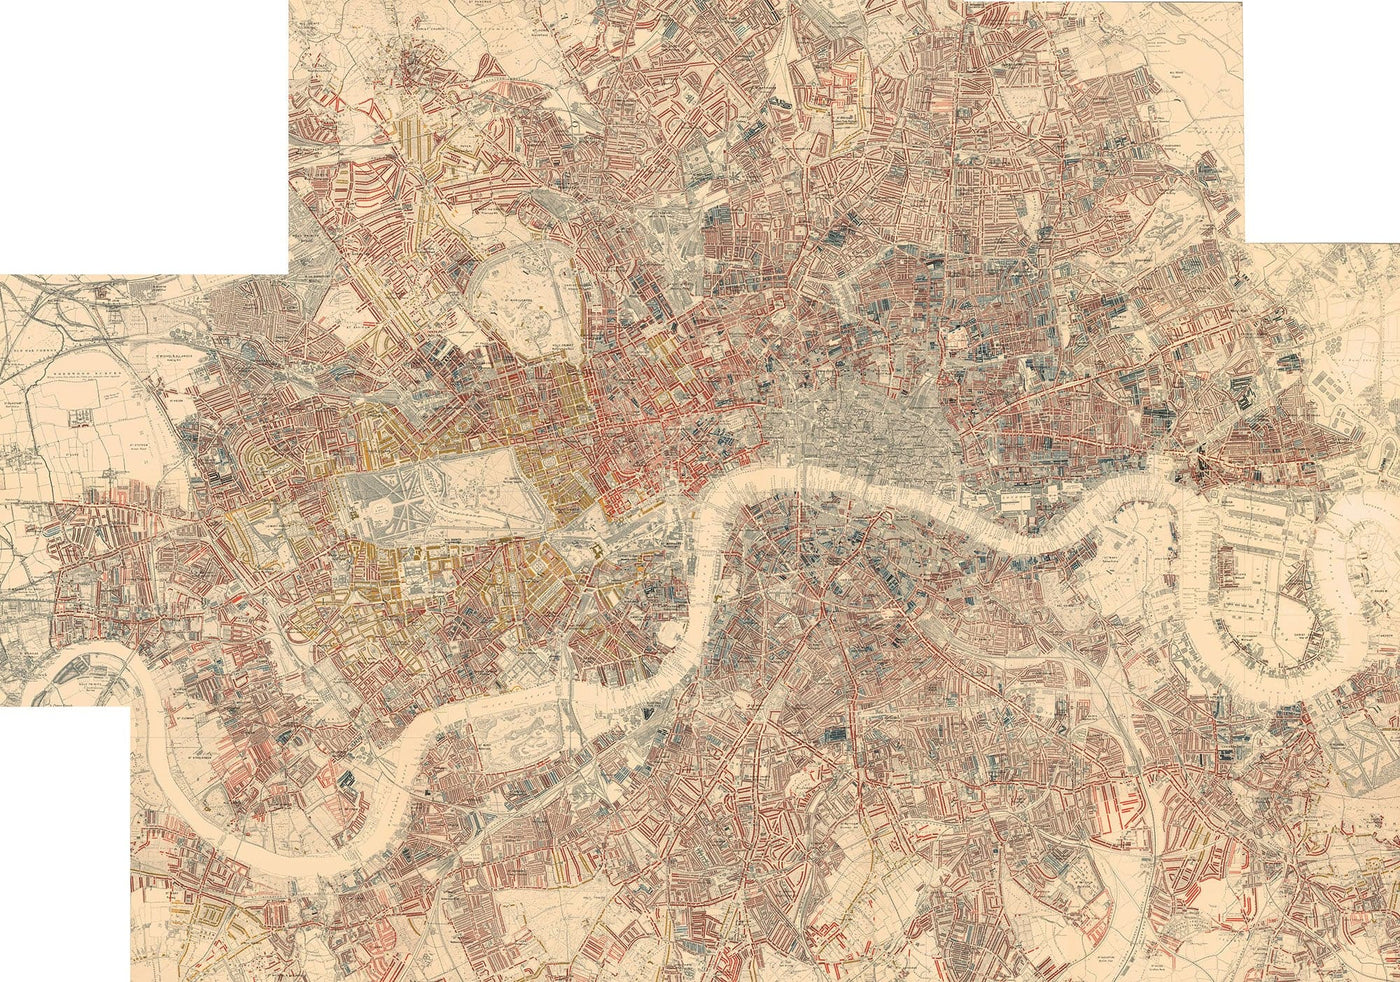 Custom Old Map of London Armut von Charles Booth, 1898-9